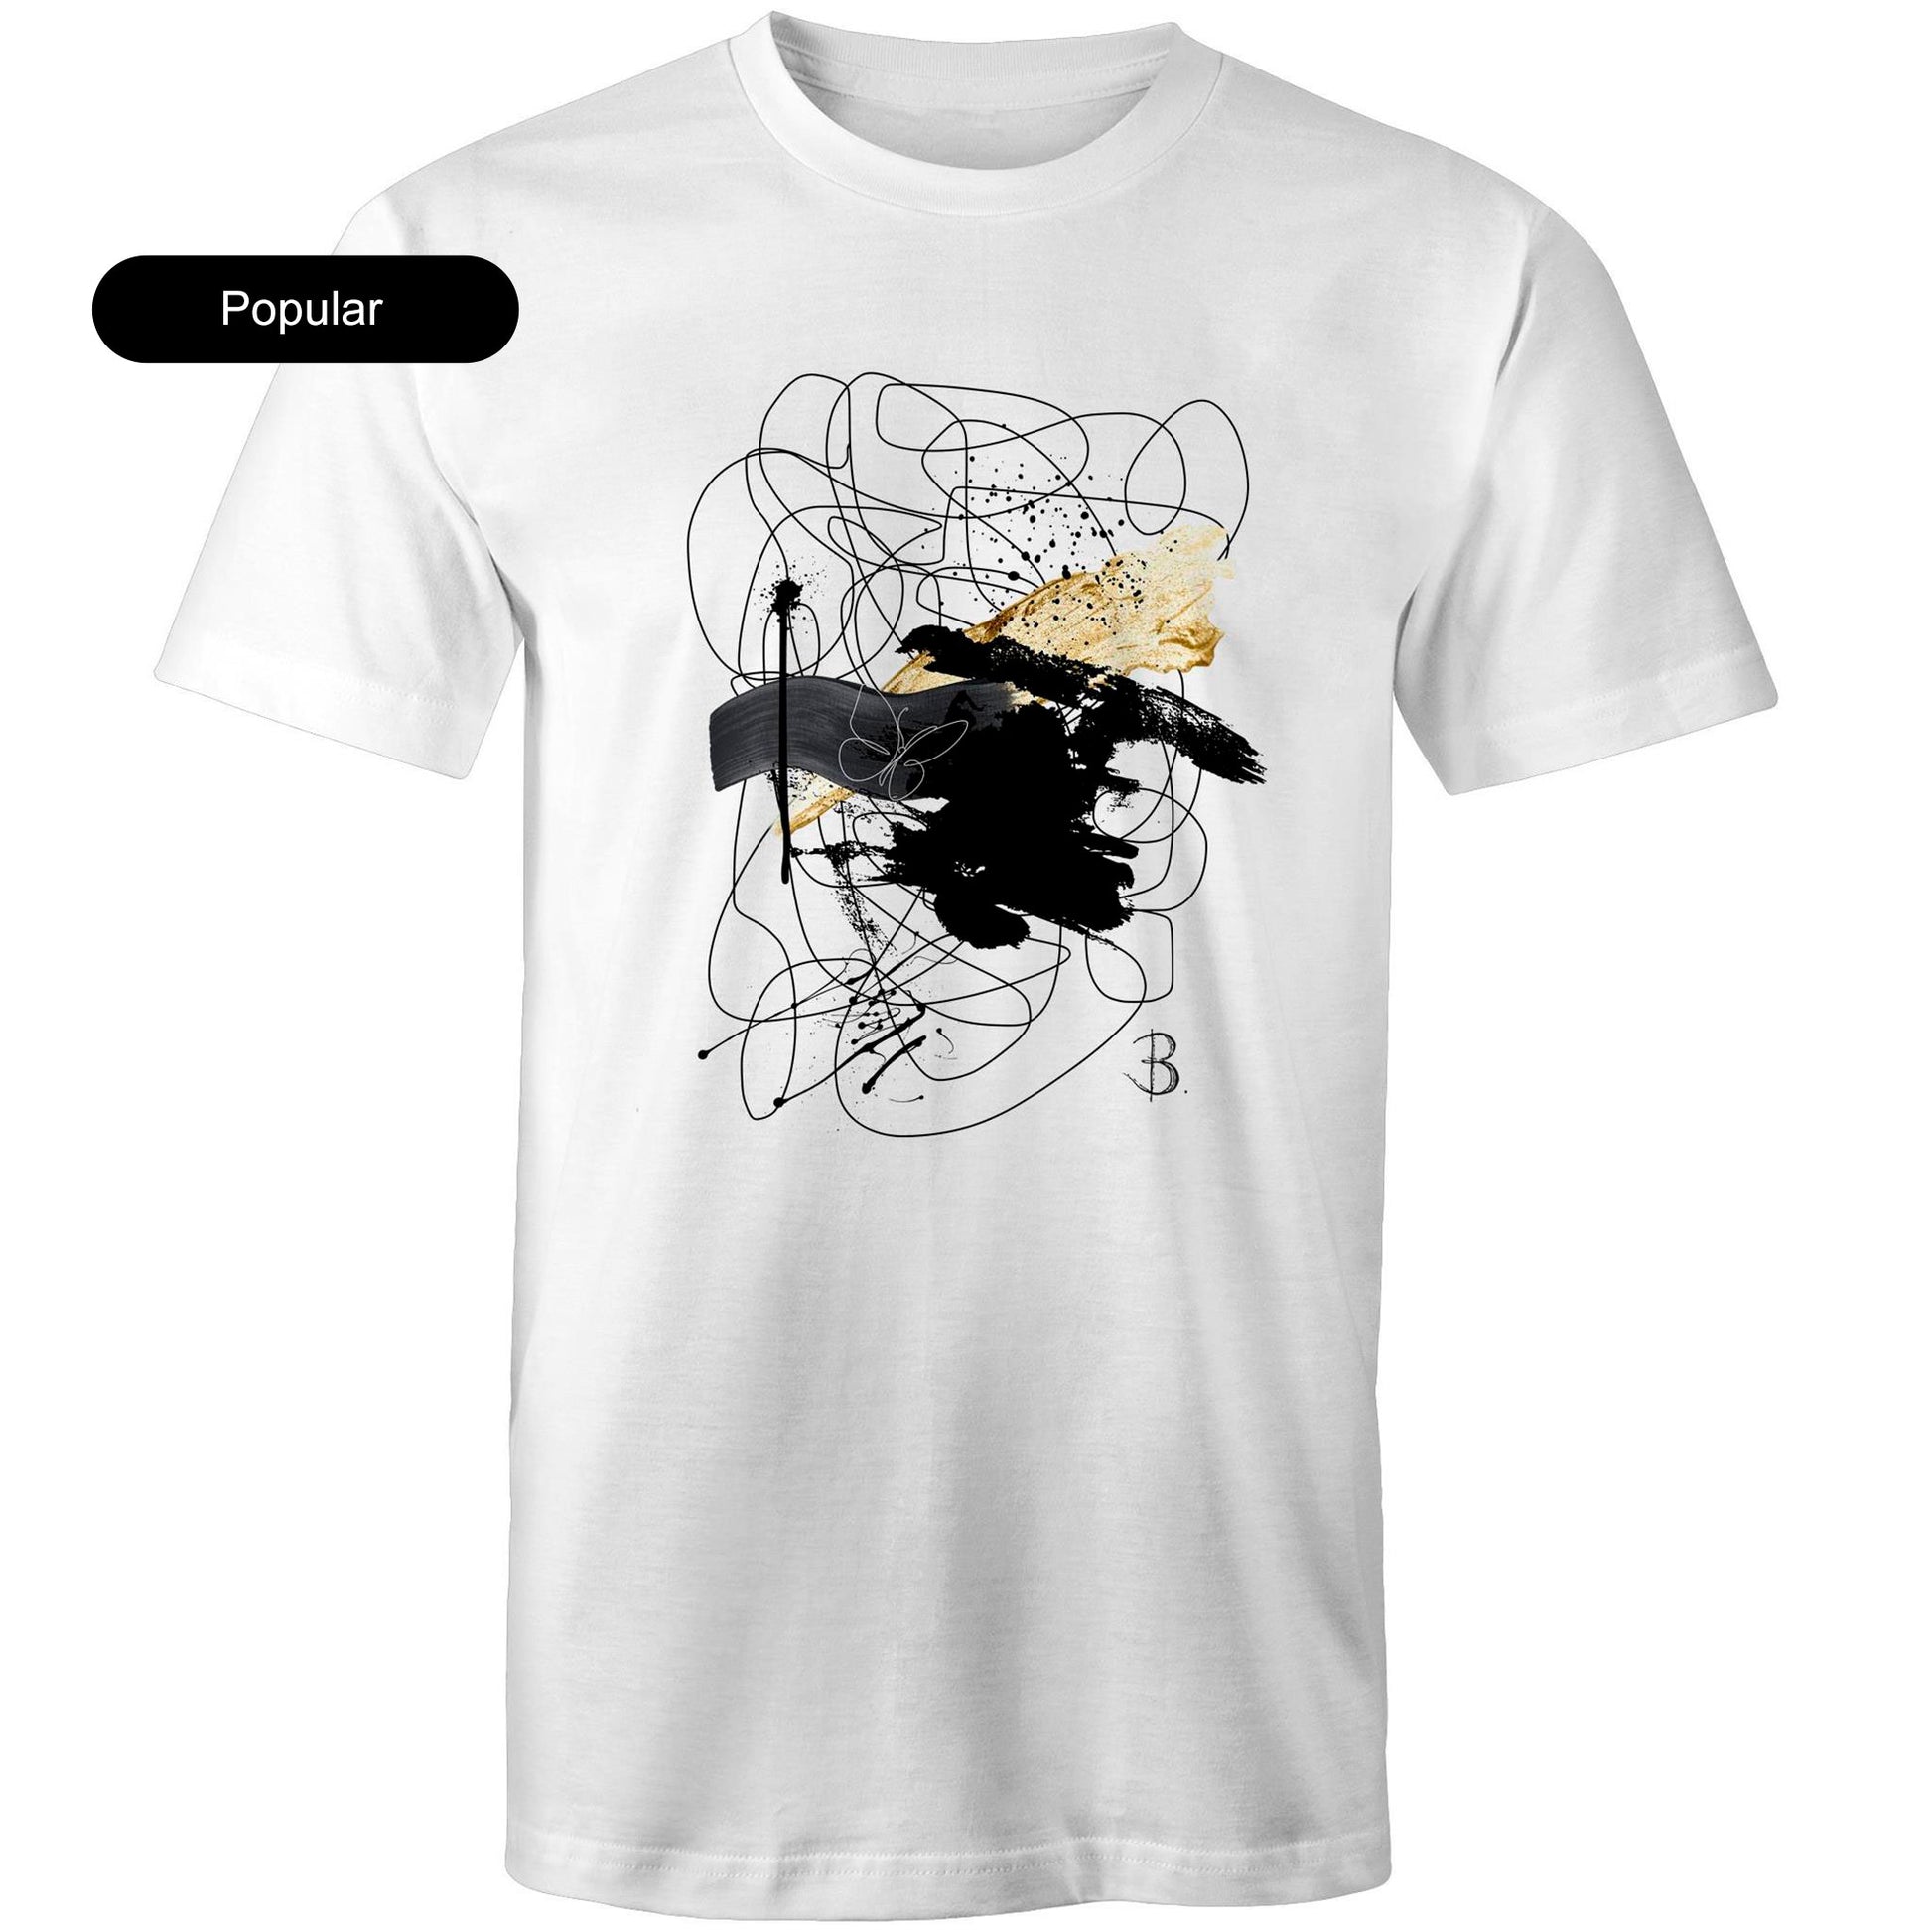 'Swatch Tee Black and Gold Tee'  Exclusive Front Print Design for 'B. Streetwear"  by Bridget Bradley is high quality 100% sustainably sourced cotton. Men's and Unisex t-shirt in White. Learn more now.